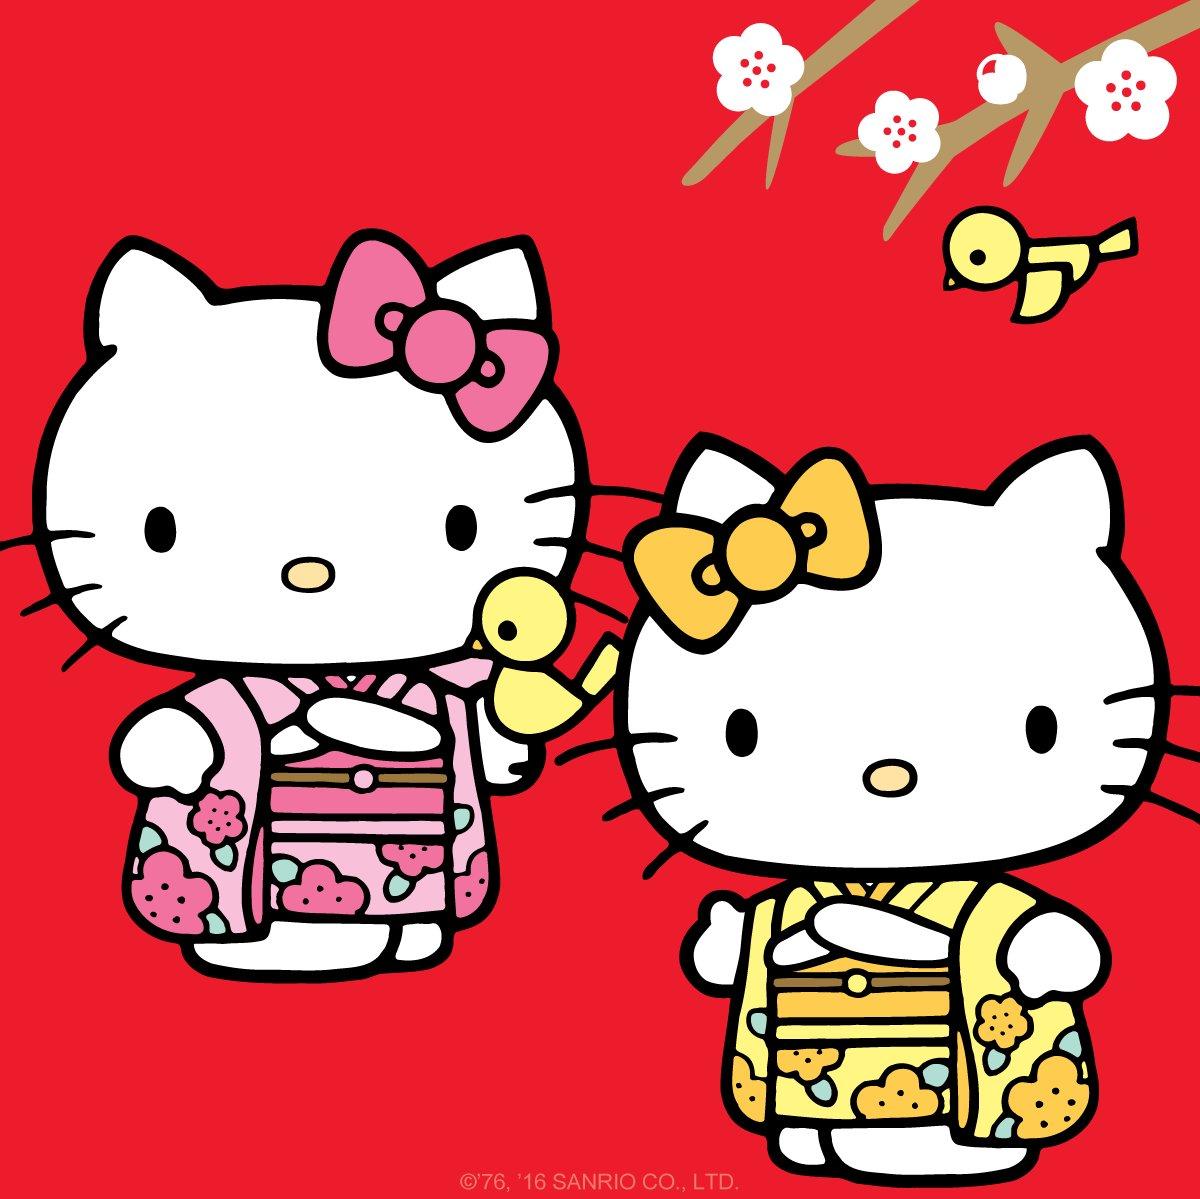 Hello Kitty on HelloKitty and her twin sister Mimmy are